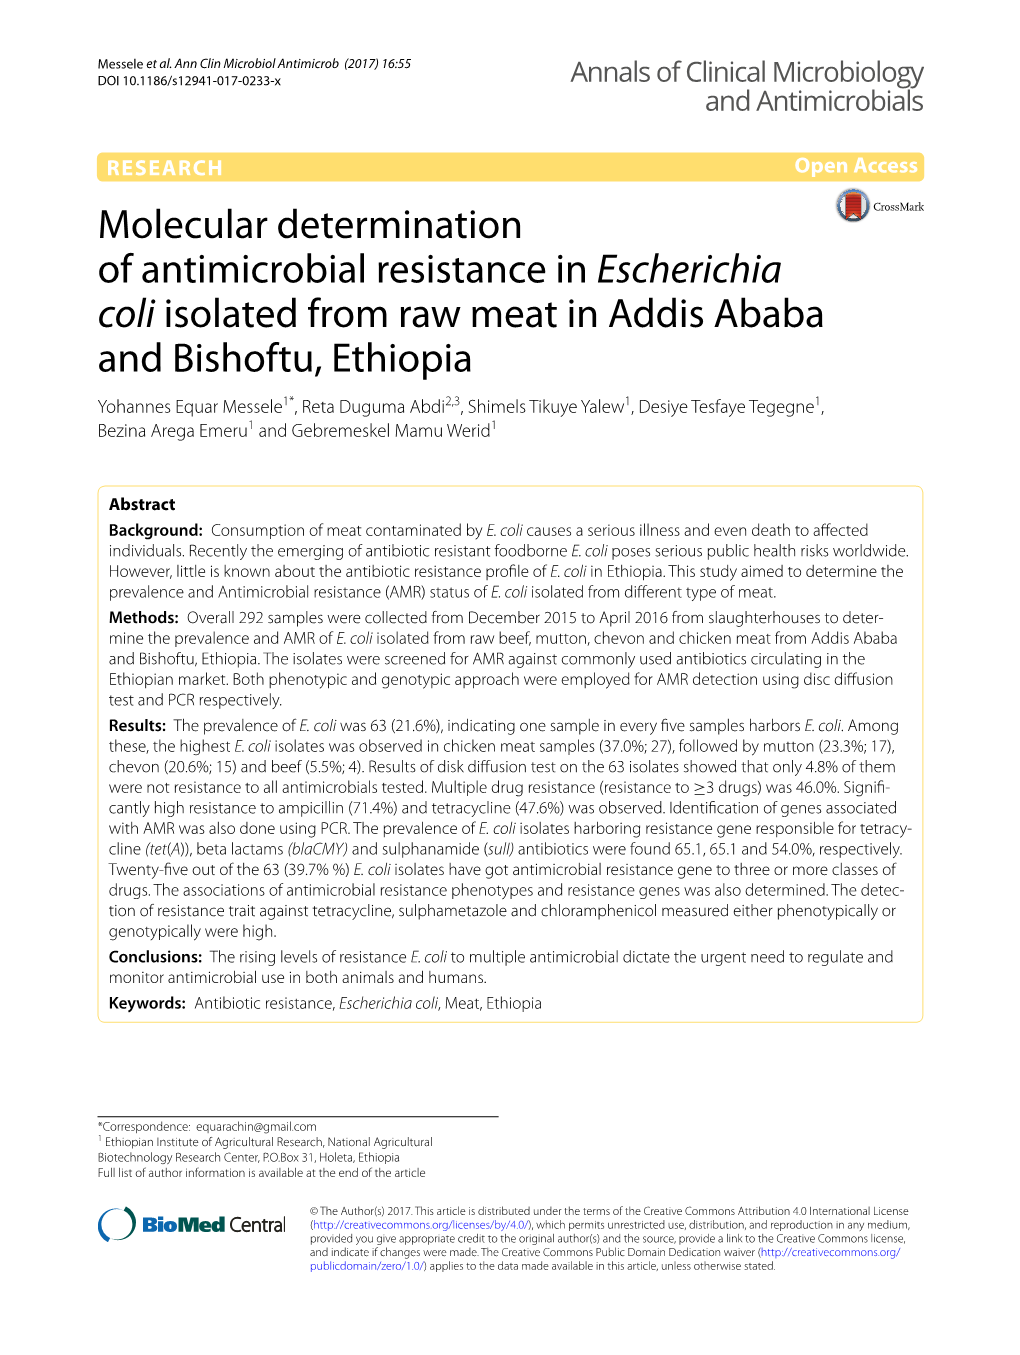 Molecular Determination of Antimicrobial Resistance In